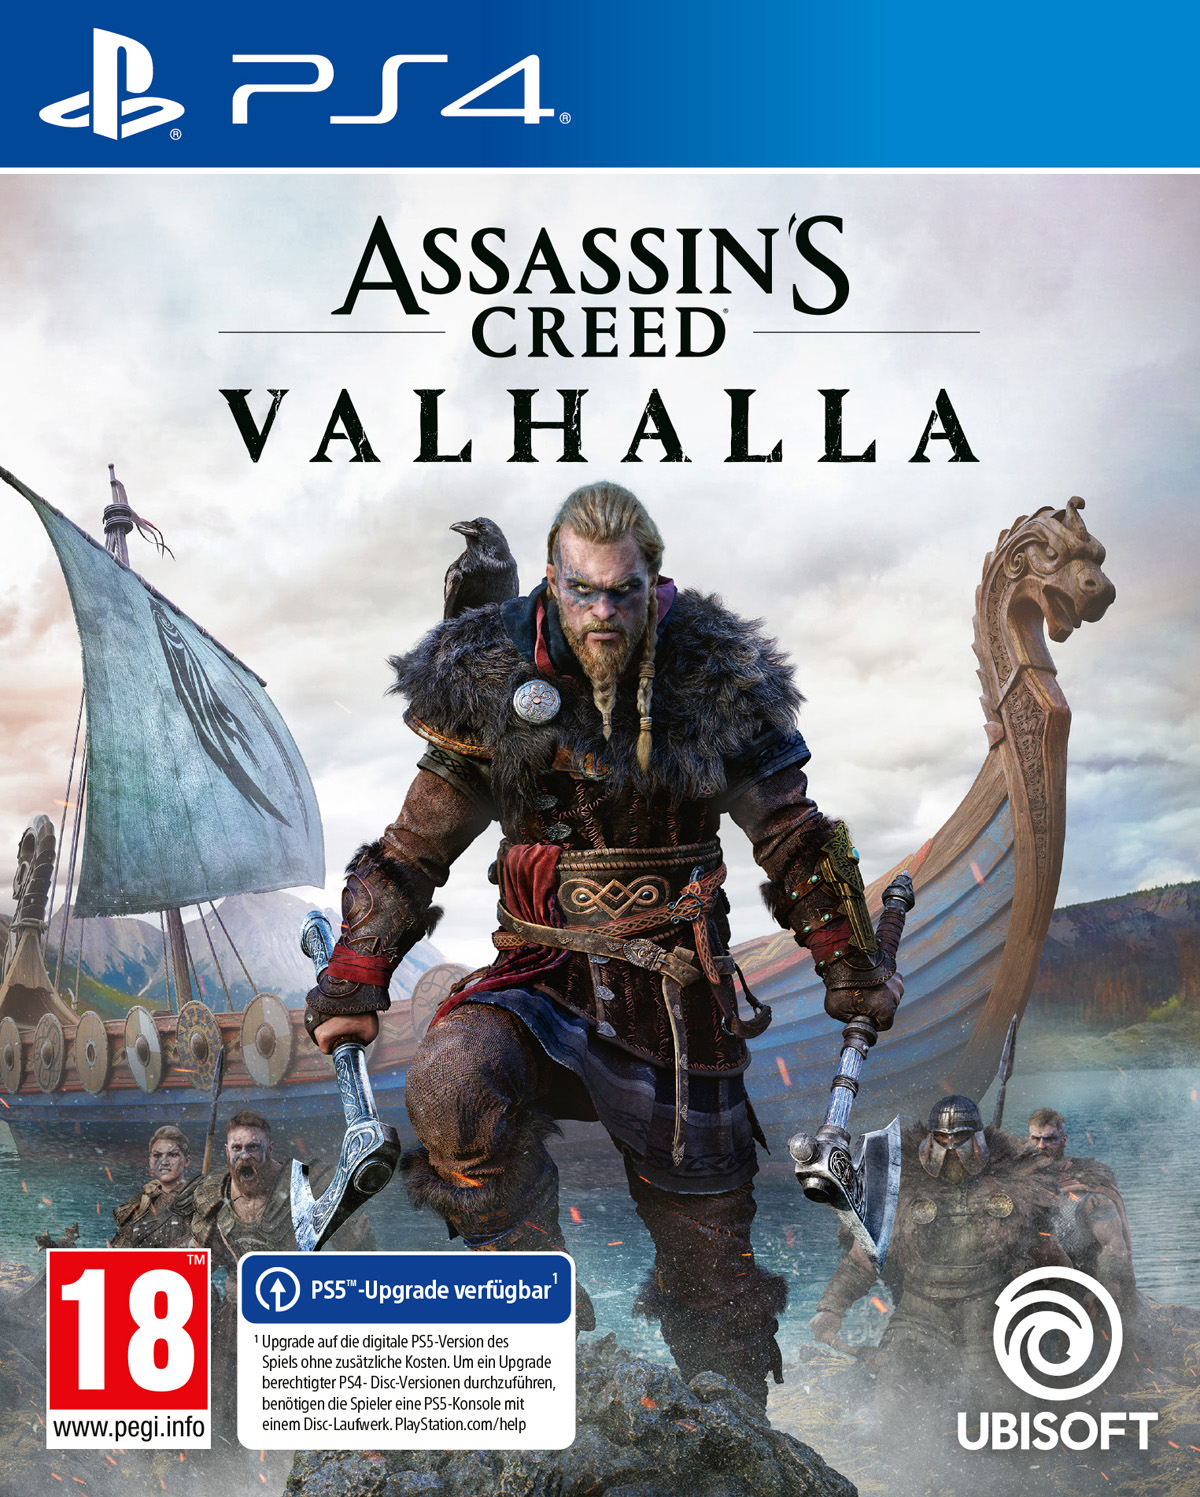 [PS4] Assassin's Creed Valhalla: Ultimate Edition